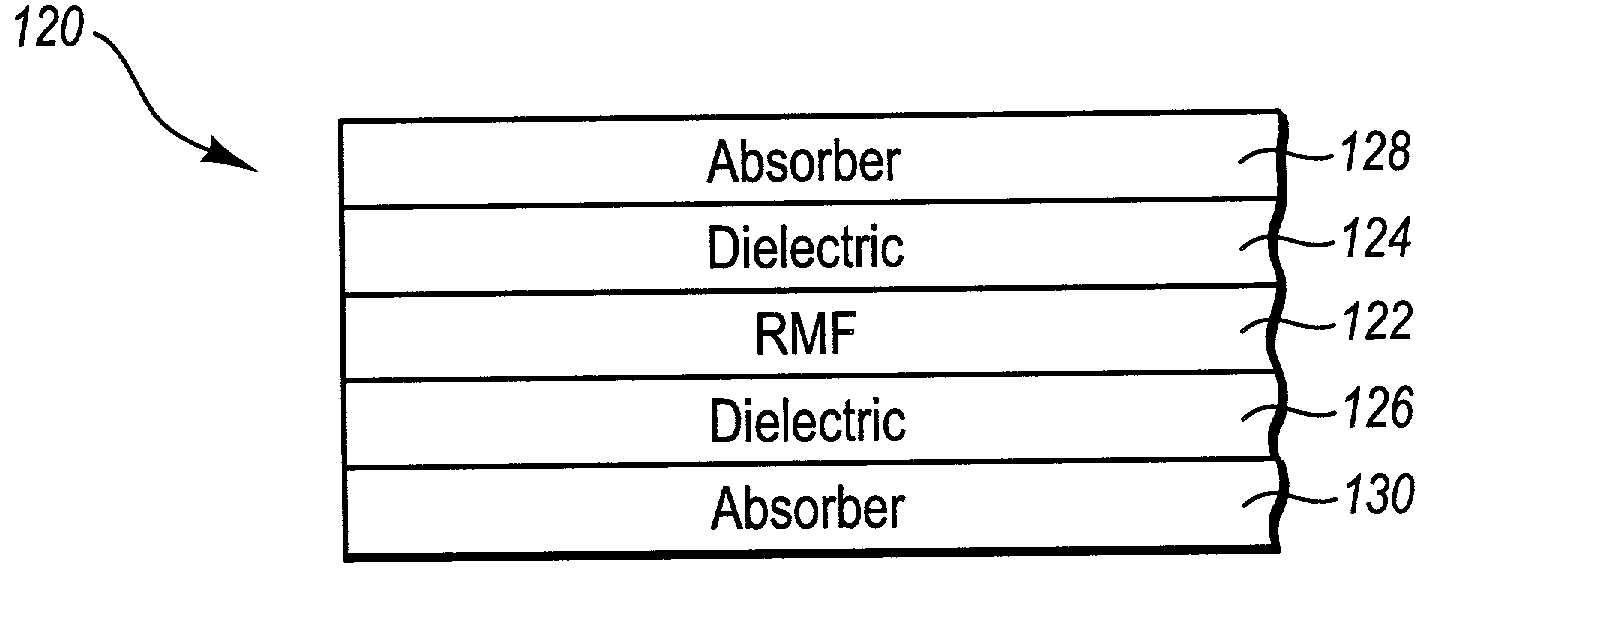 Methods for producing imaged coated articles by using magnetic pigments